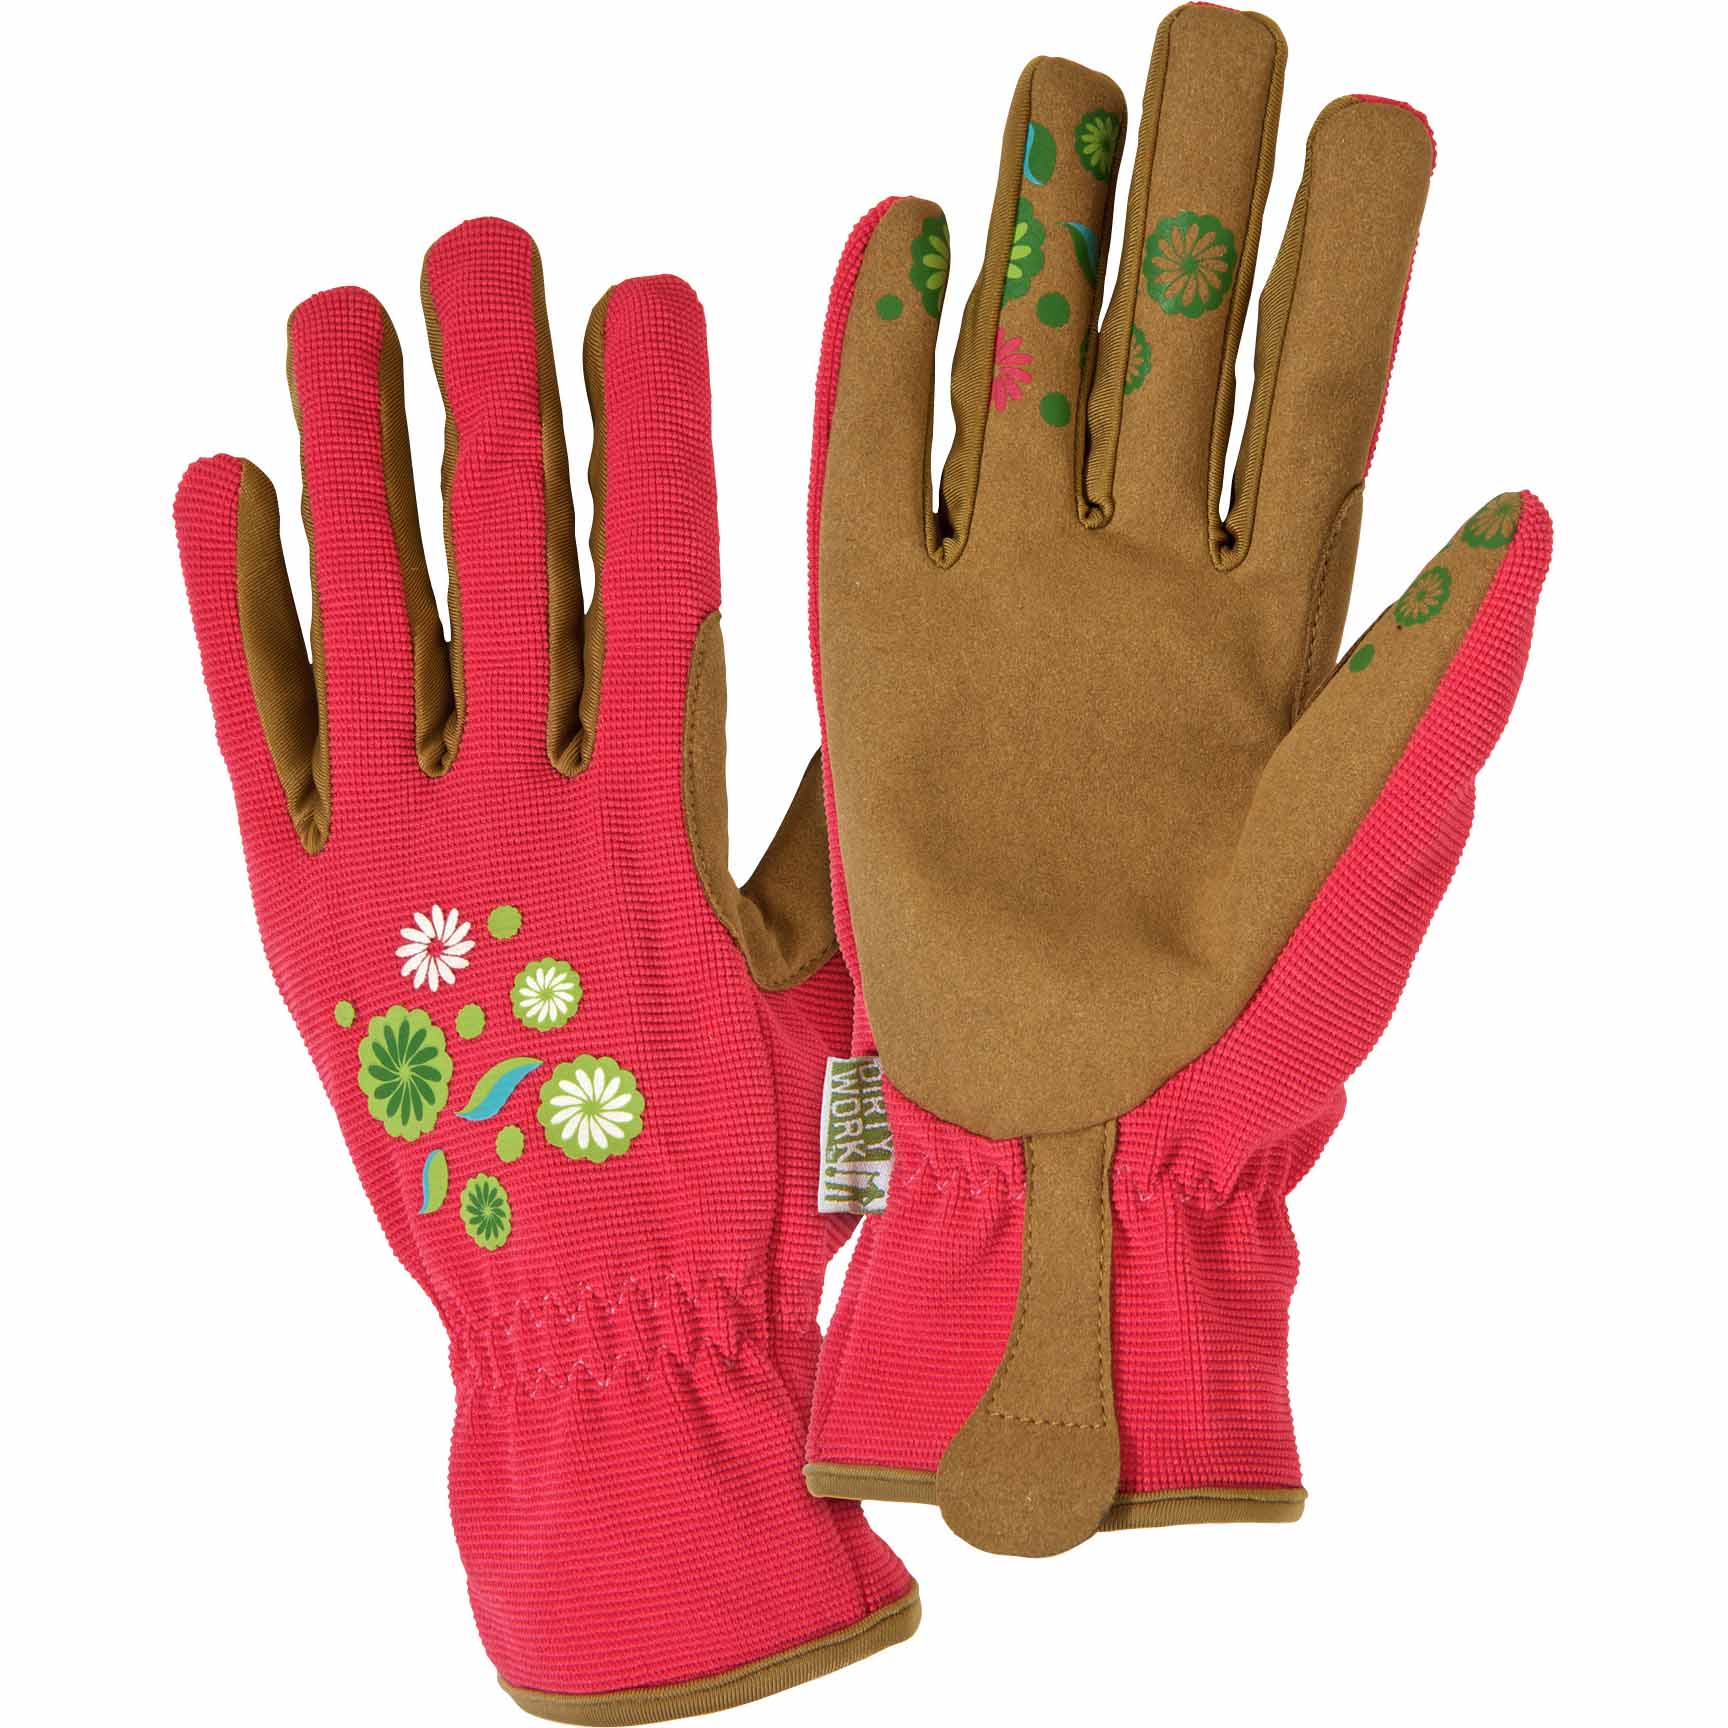 DW86201/WL Women's Synthetic Leather Slip-On Gardening Gloves - Large,